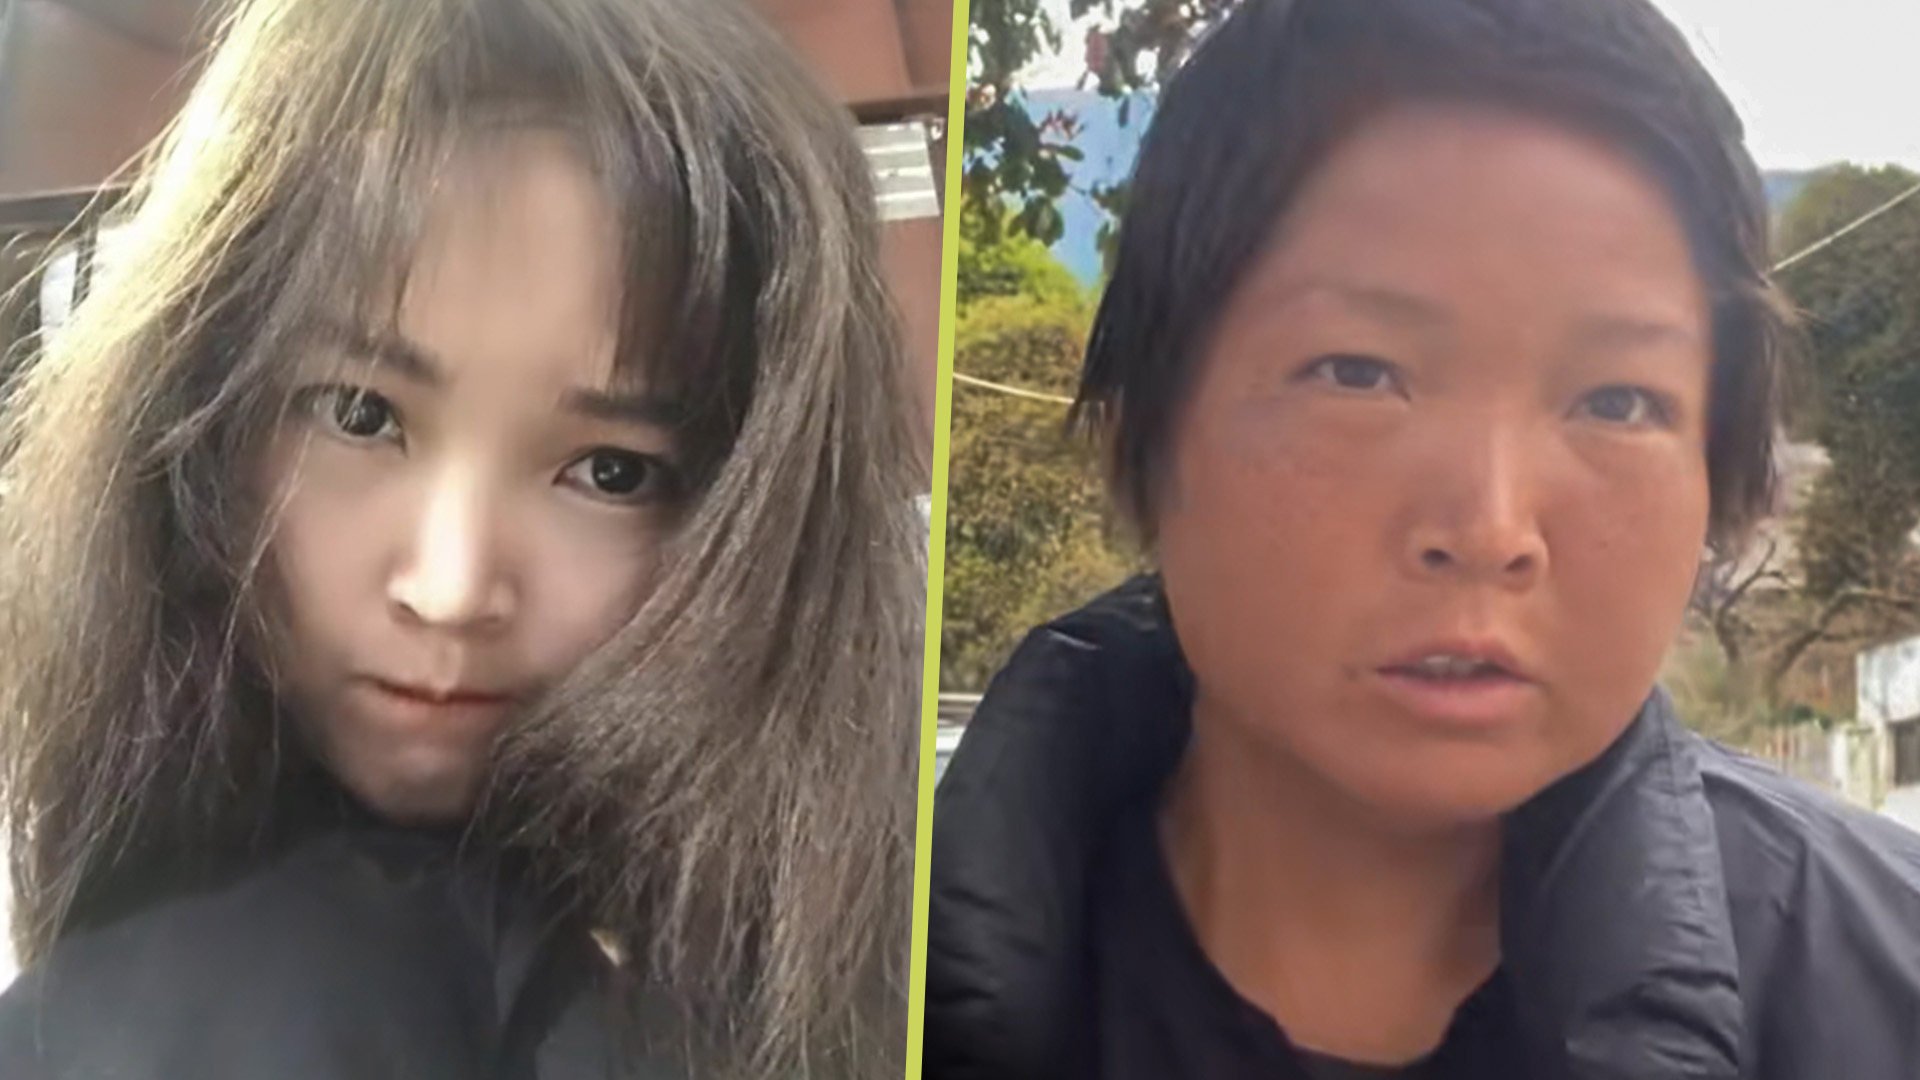 A young woman hiker in China has hit back at critics online who say her weather-beaten face makes her look decades older than her 28 years. Photo: SCMP composite/Douyin